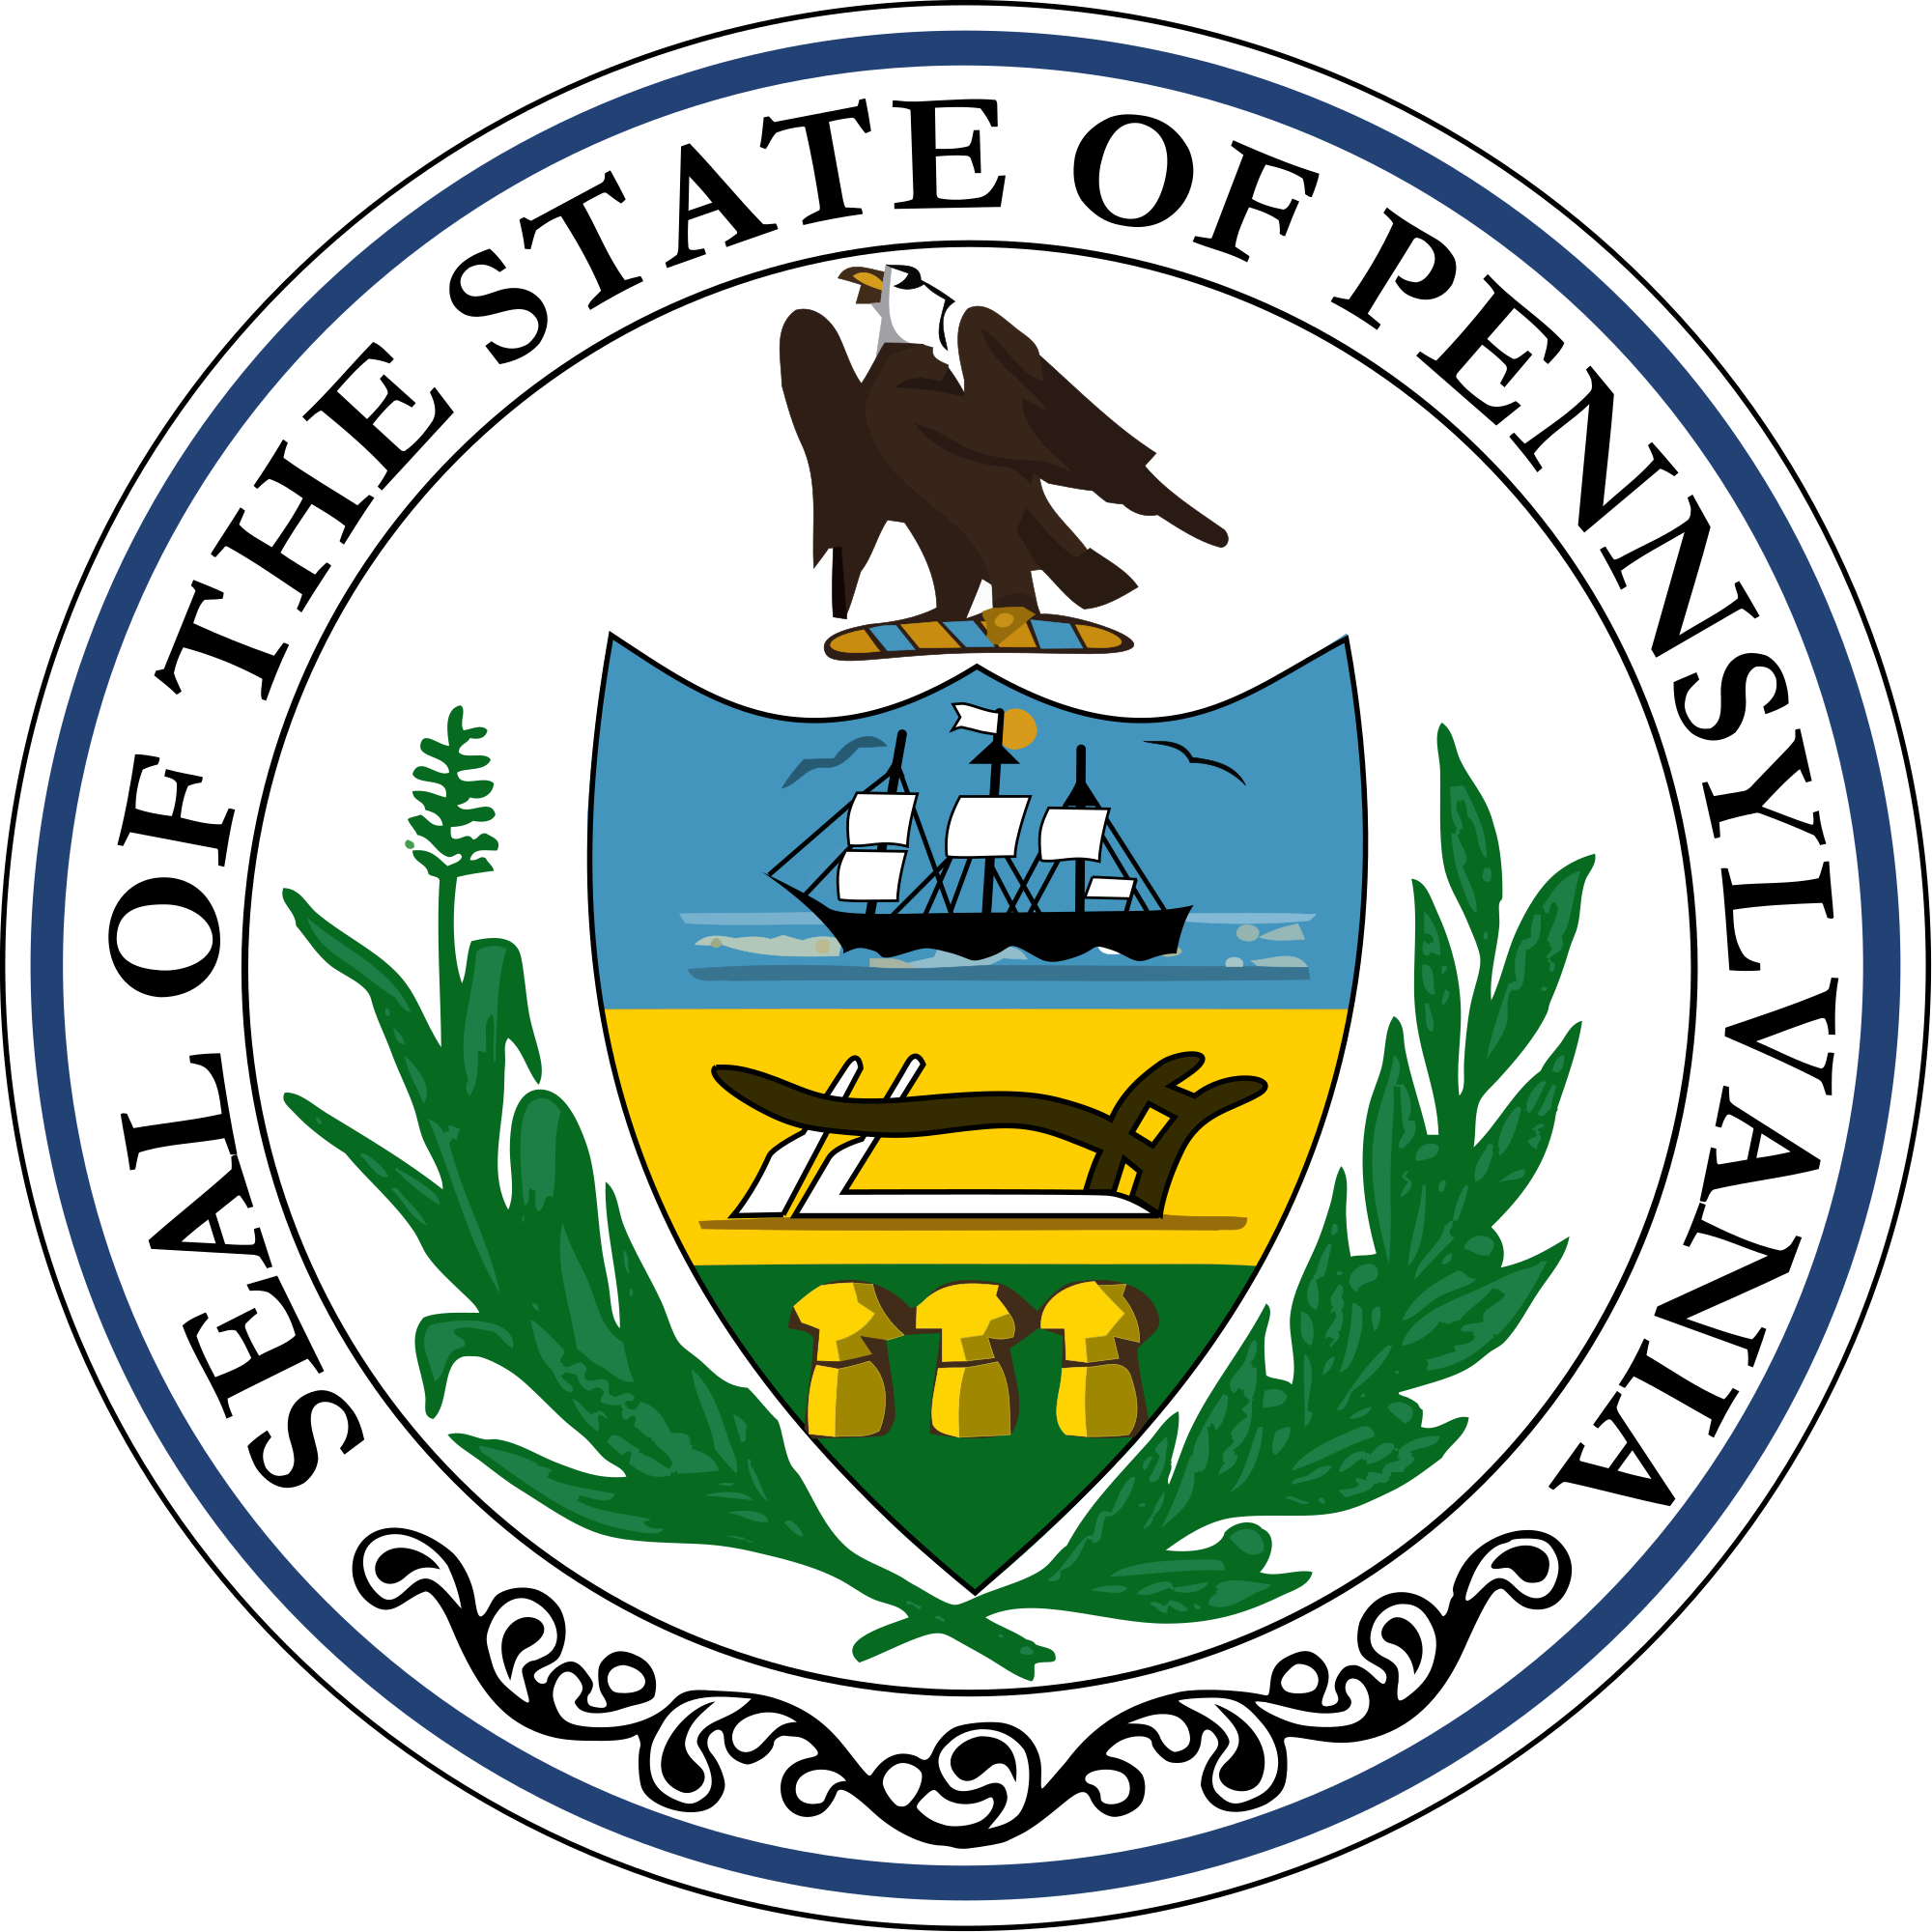 In Pennsylvania, February is the Official PA Craft Brewery Month – PA Logo Shown